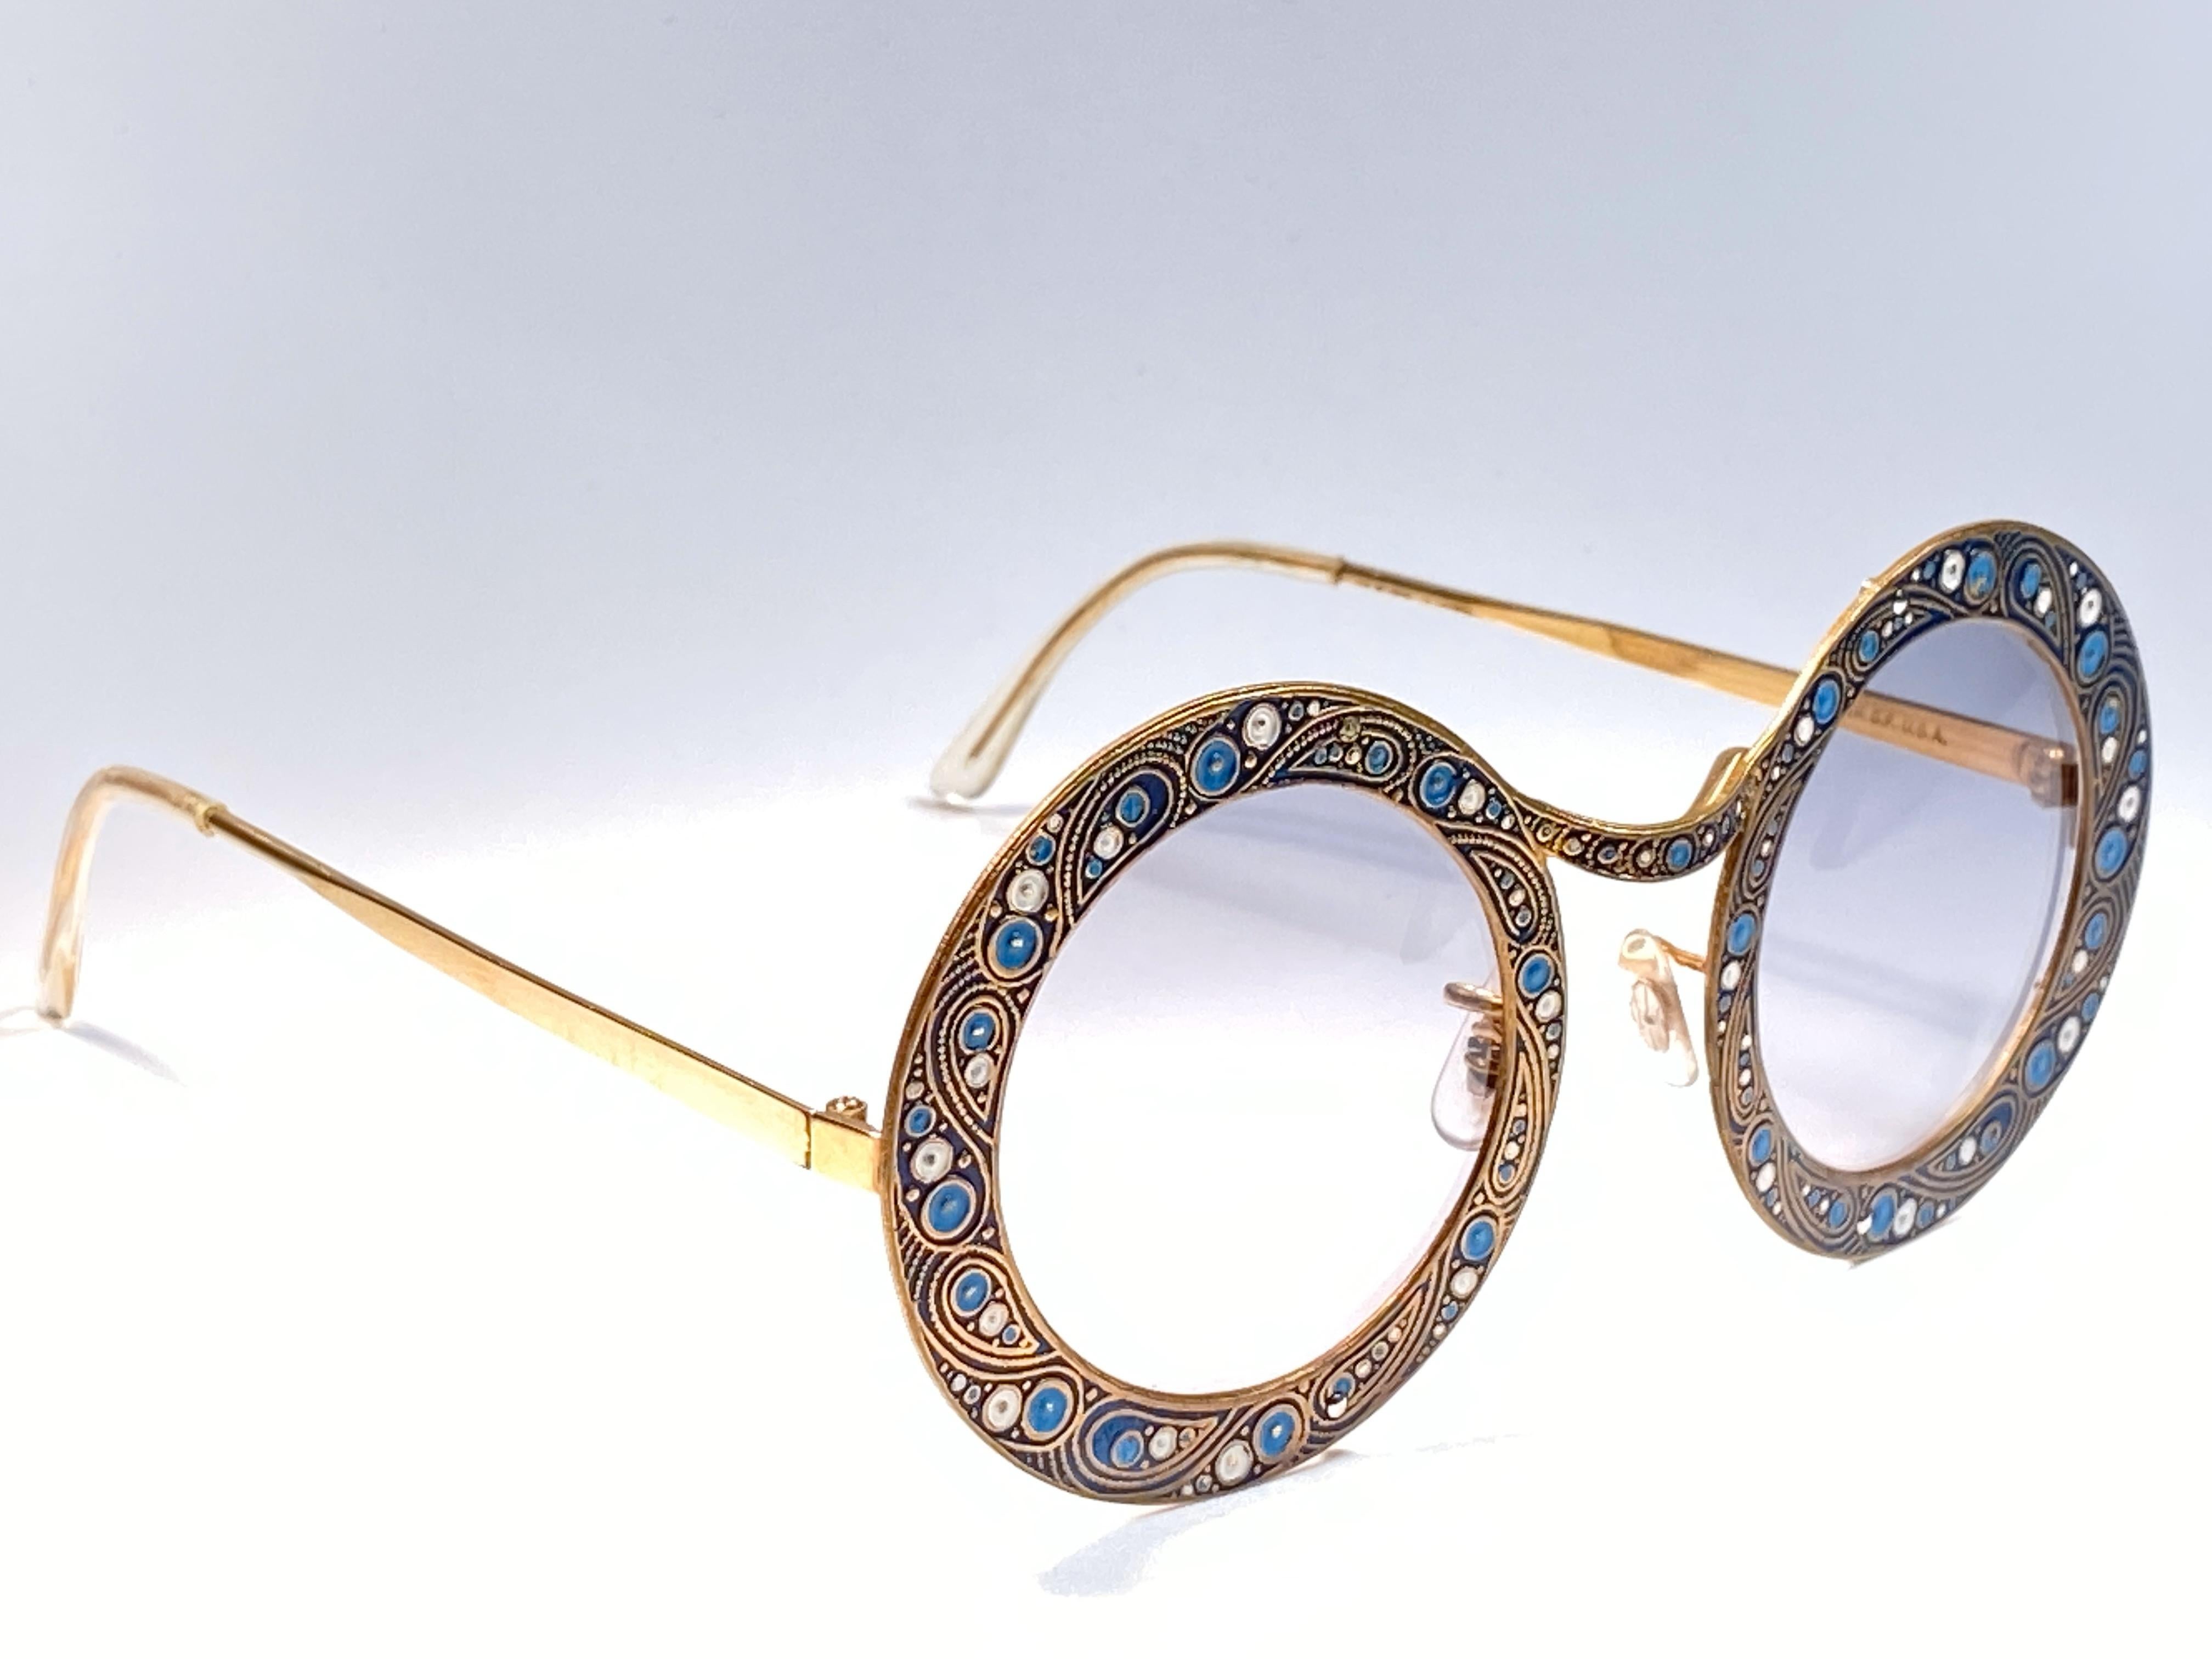 Ultra rare pair of Christian Dior Sunglasses circa 1969.

This is a seldom and rare piece not only for its aesthetic value but for its importance in the sunglasses and fashion history. 

Delicate enamel ornamented plated frame.

Please noticed this